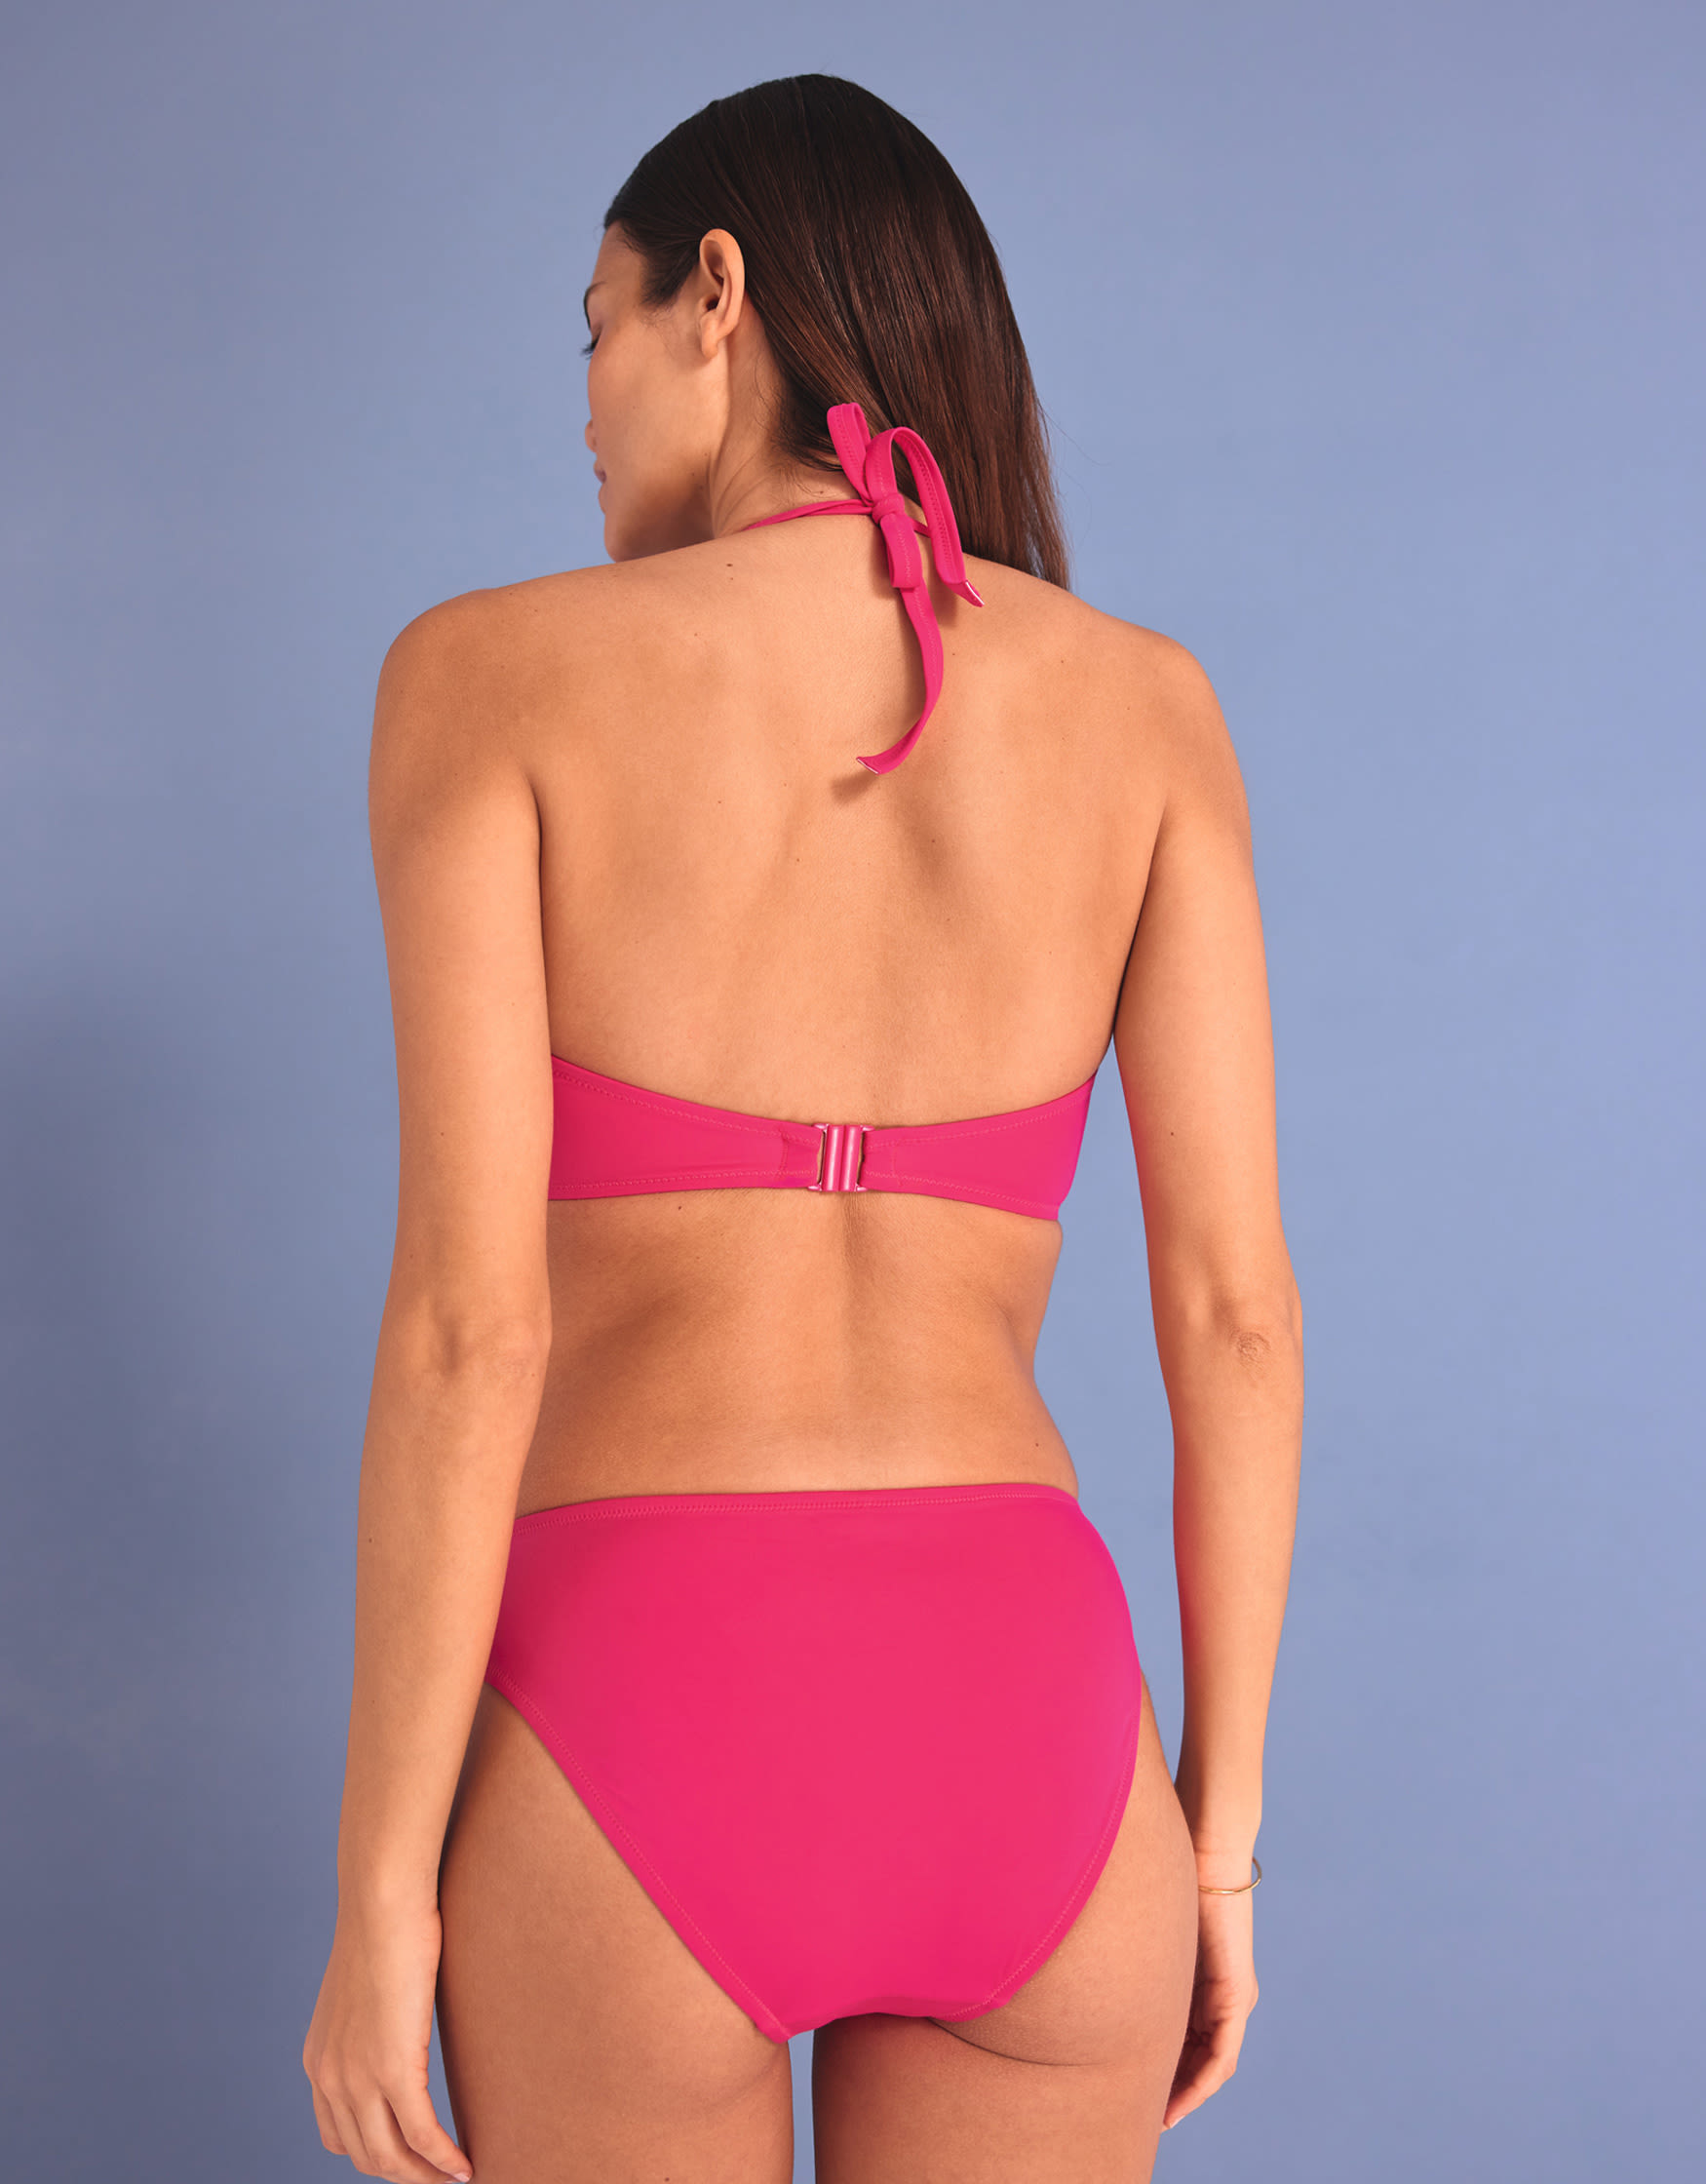 Anyone who is small w/ a large bust been able to find a good swimsuit  pattern? I am small with a large bust (30G) and I need to find something  that will